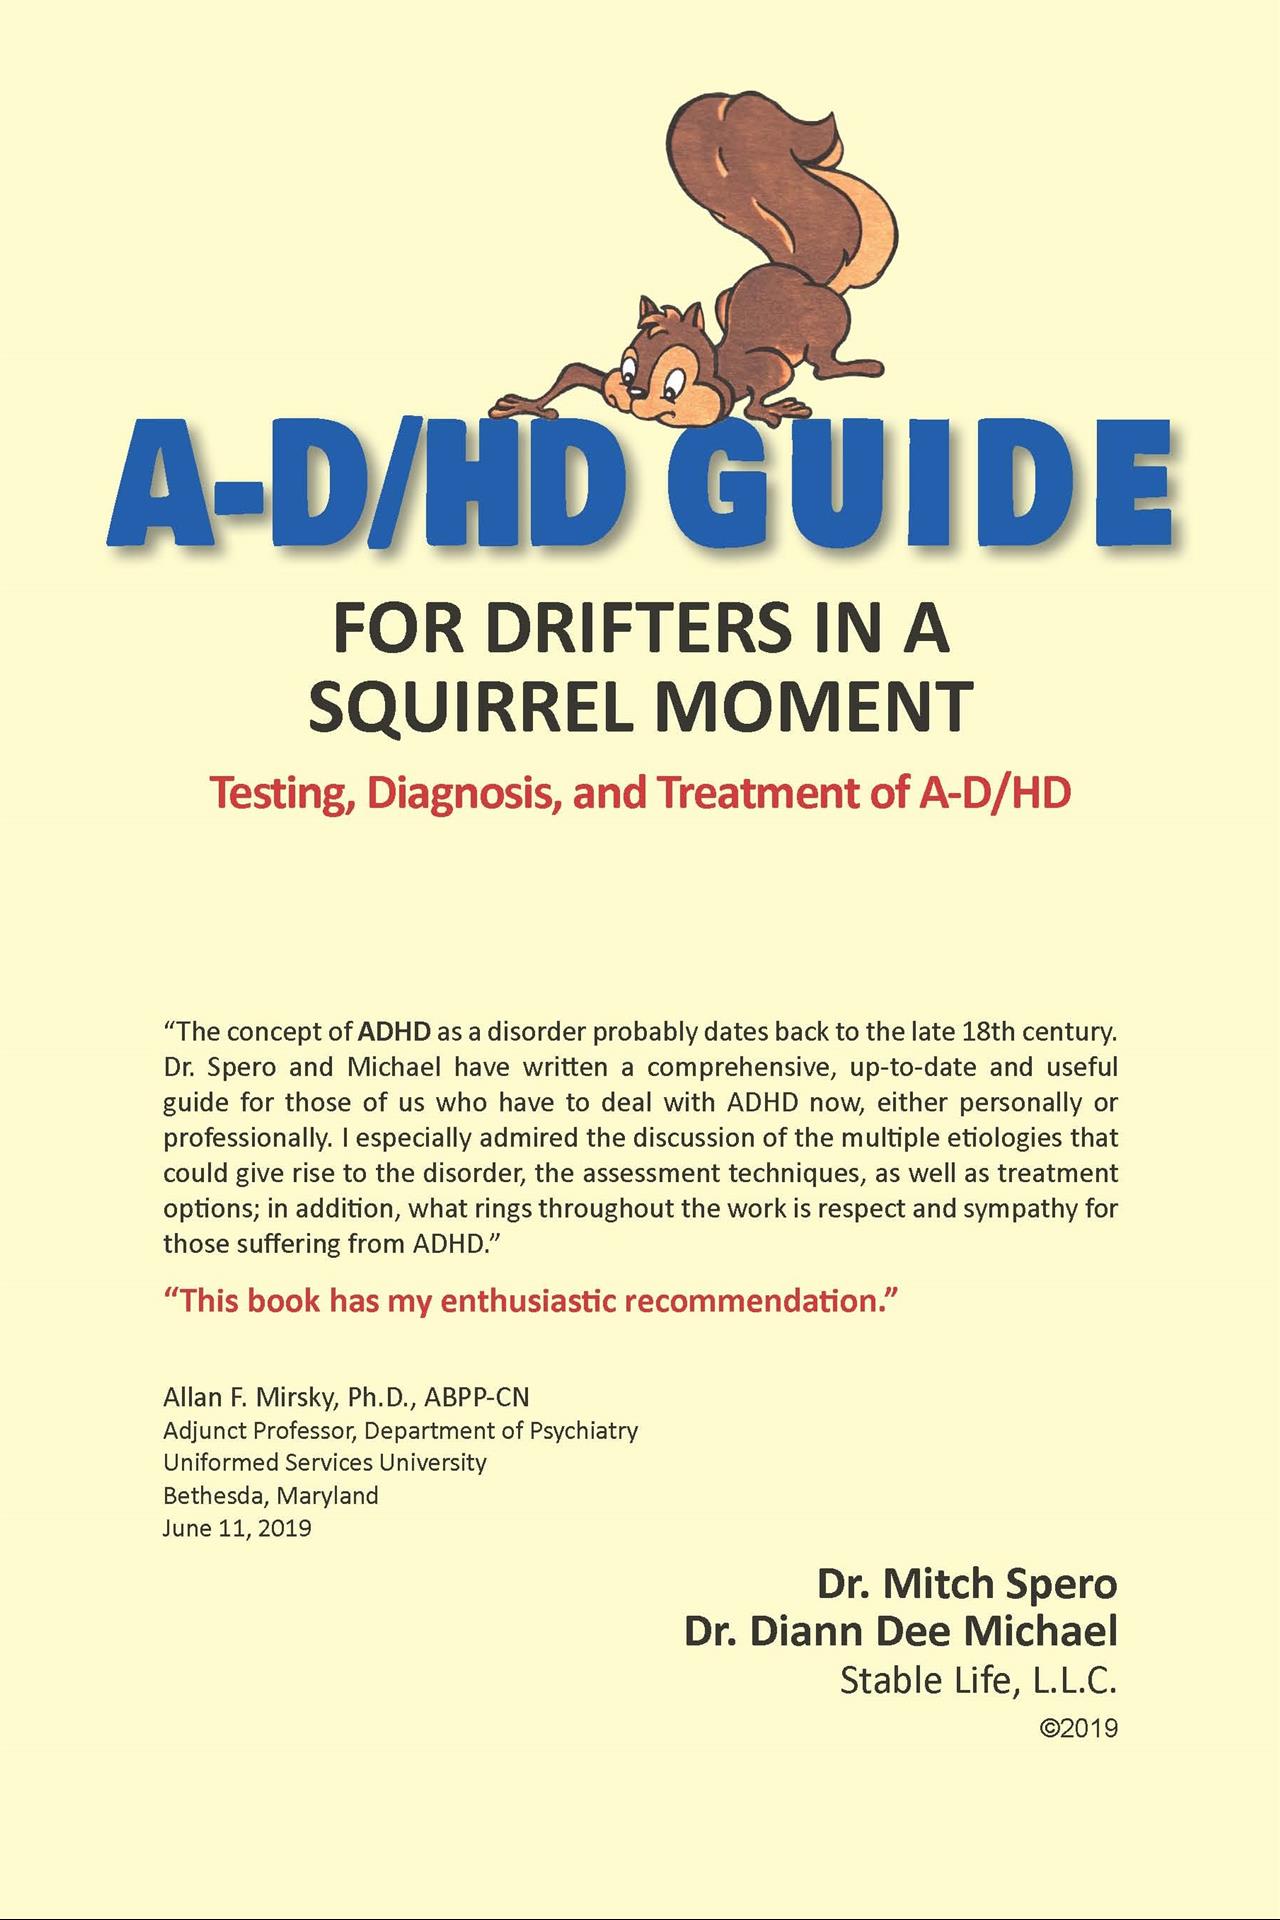 A-D/HD GUIDE FOR DRIFTERS IN A SQUIRREL MOMENT (The Book)